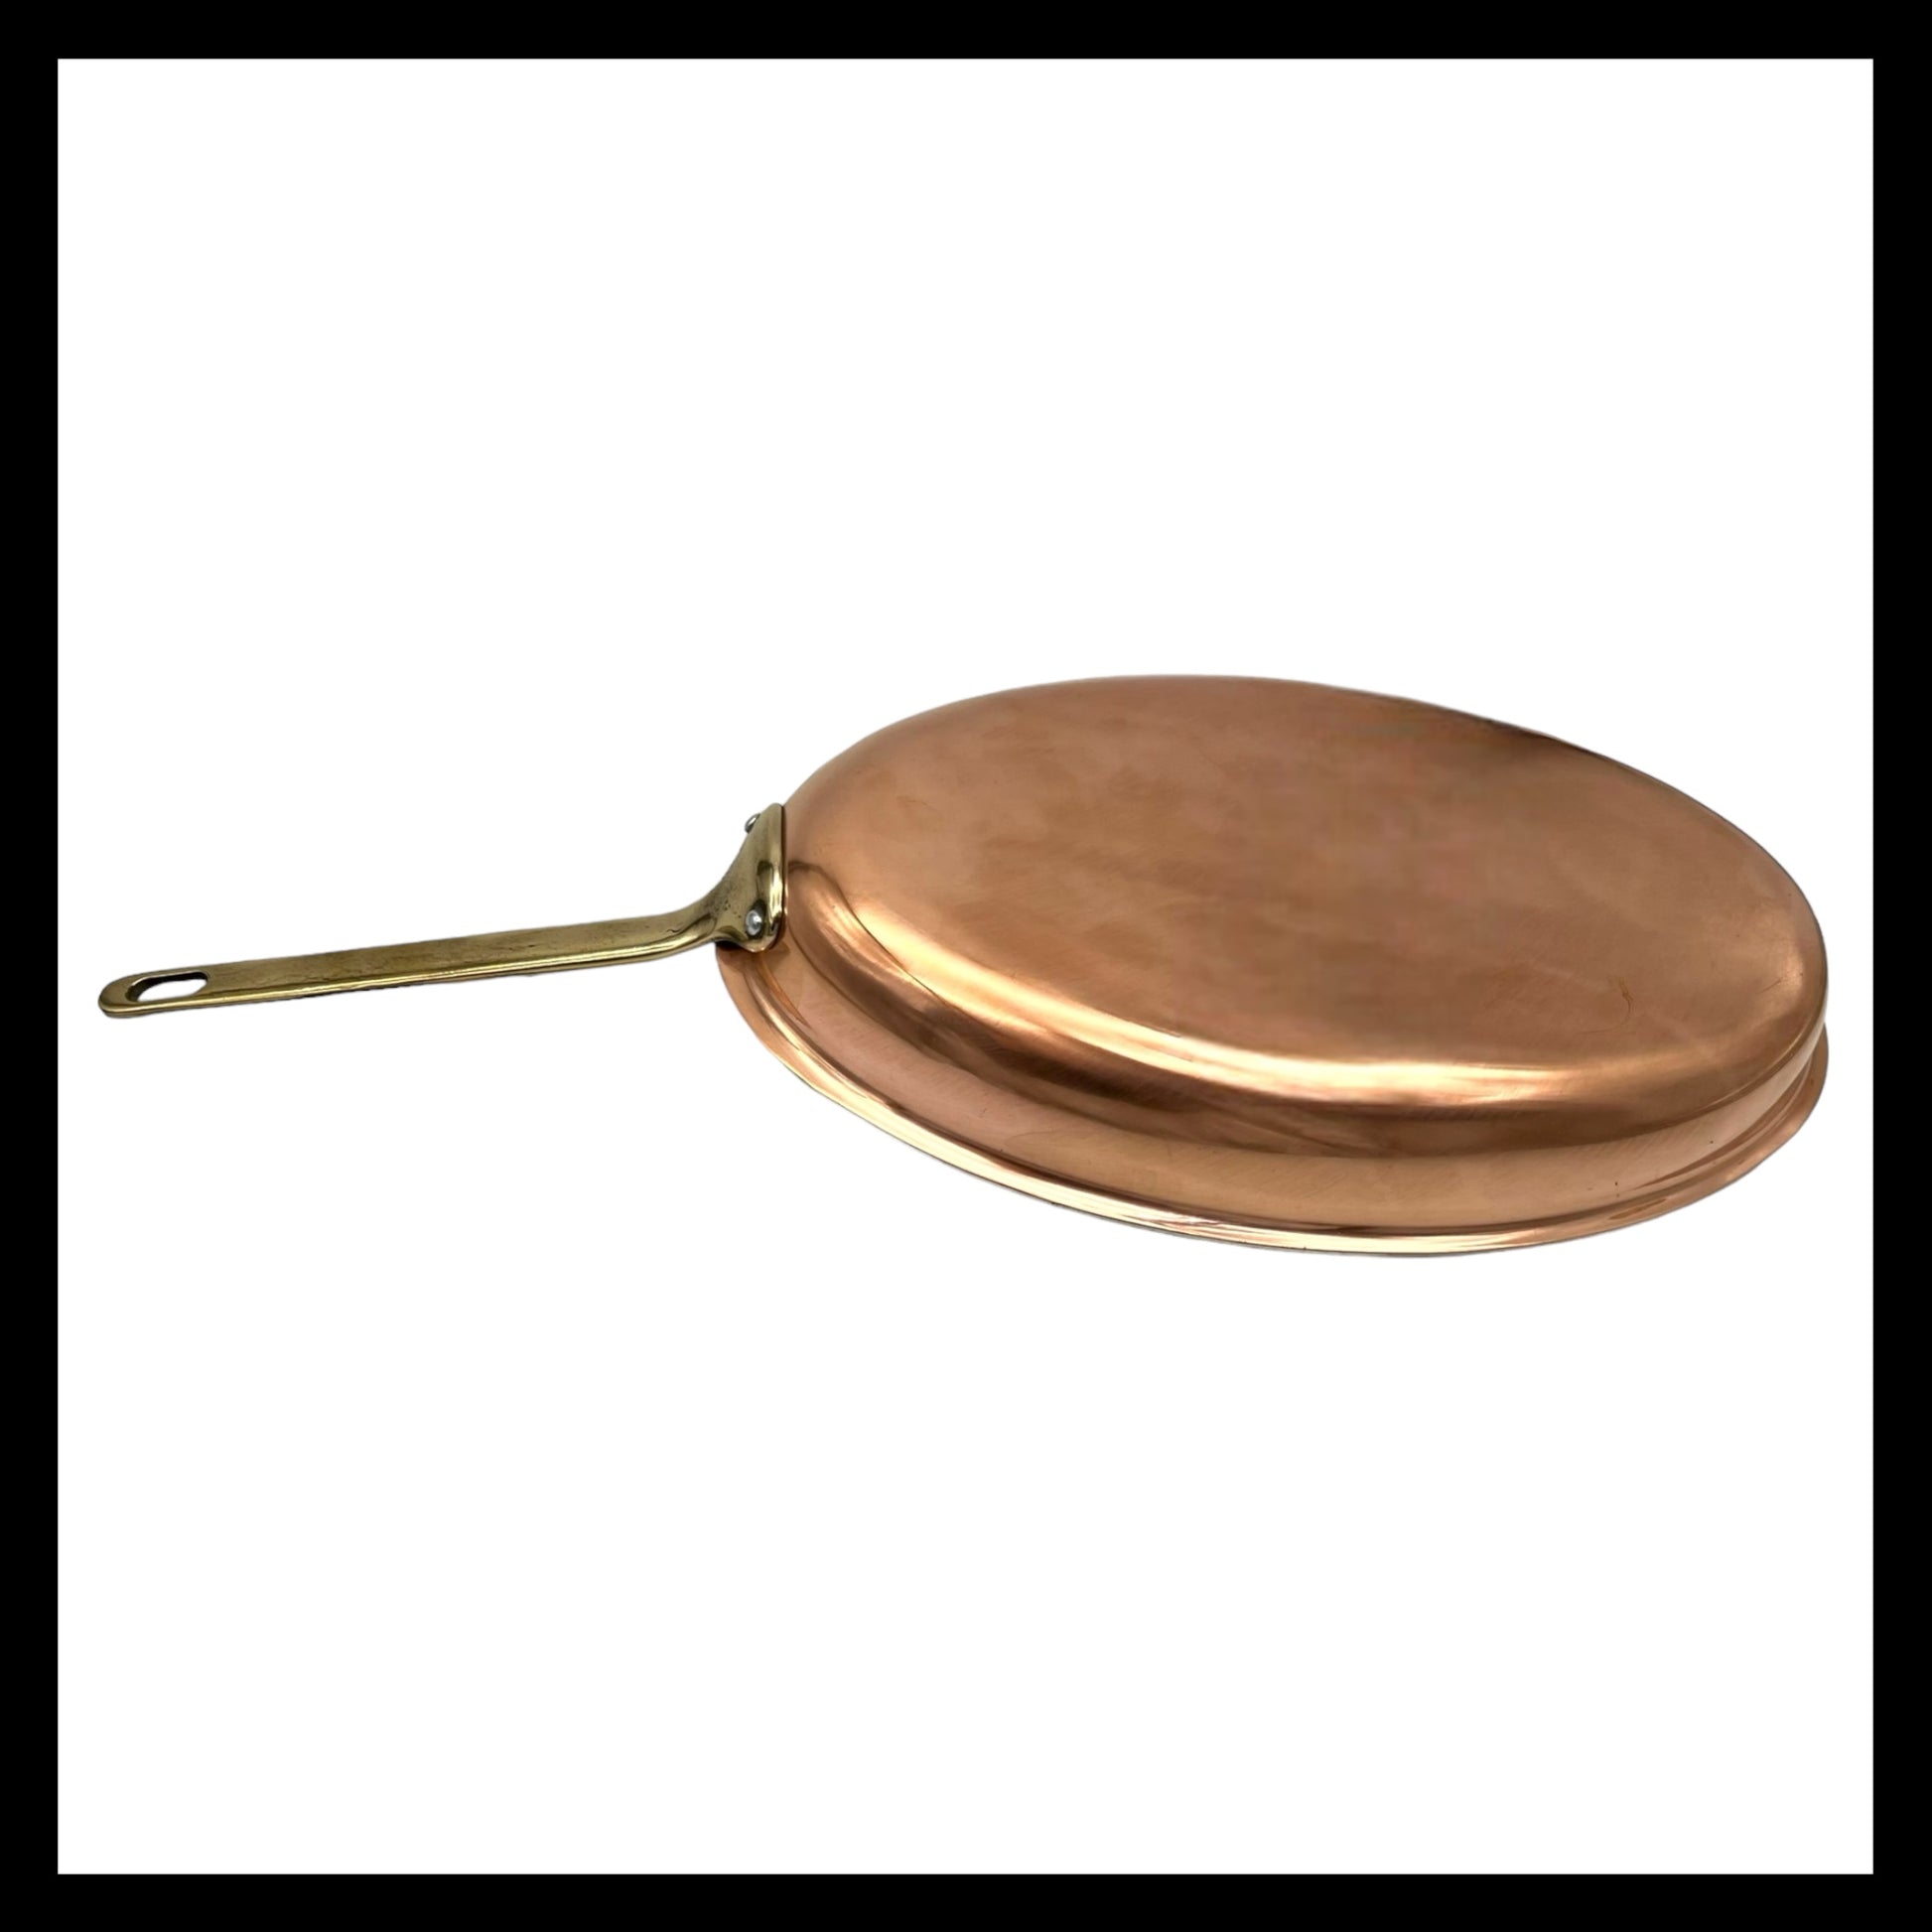 image French copper clad fish frying pan sold by All Things French Store